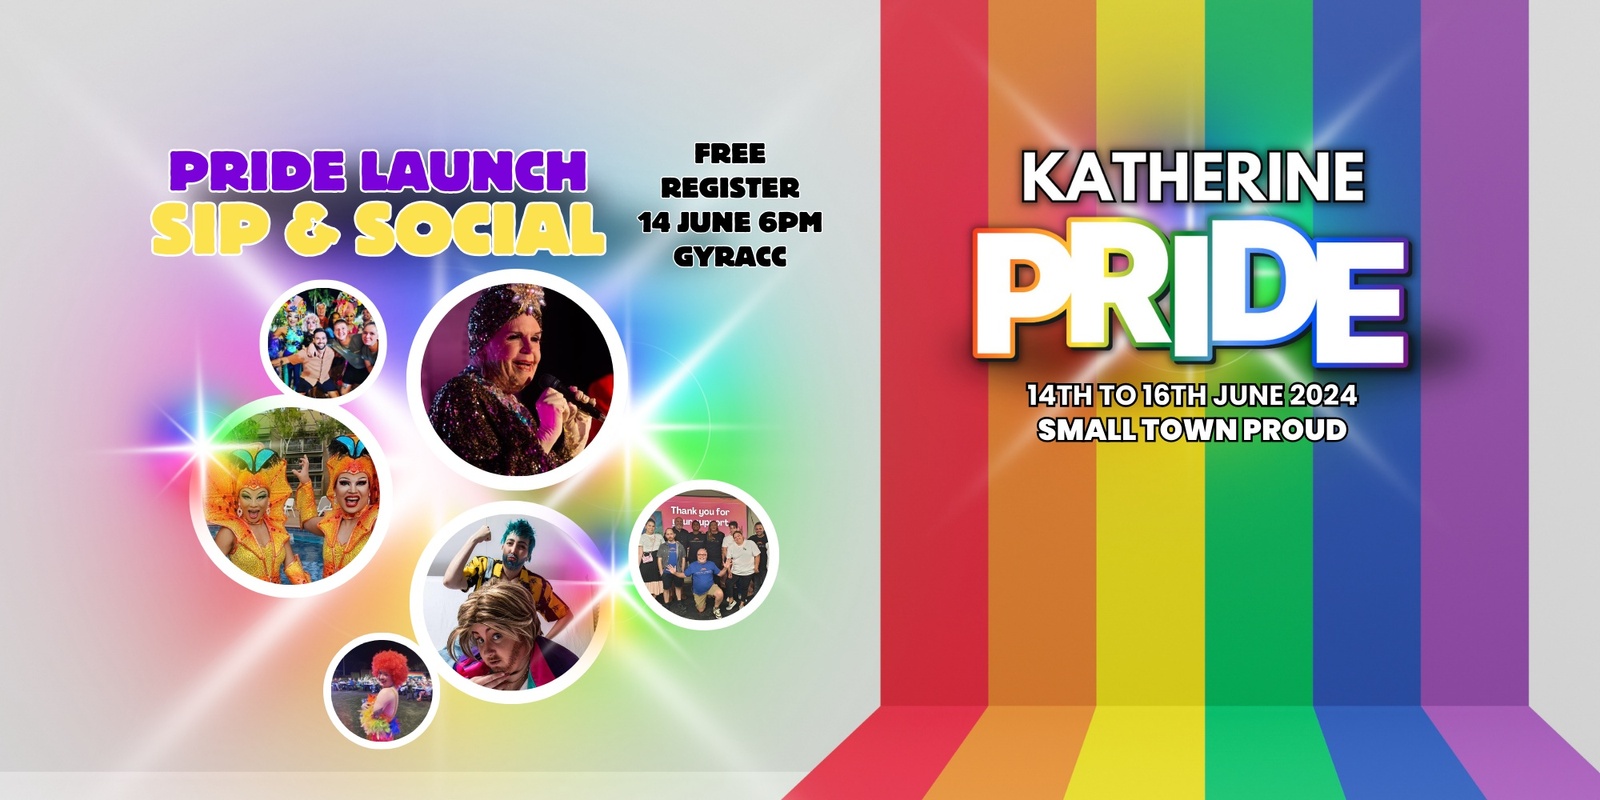 Banner image for Katherine Pride Launch " Sip & Social" 